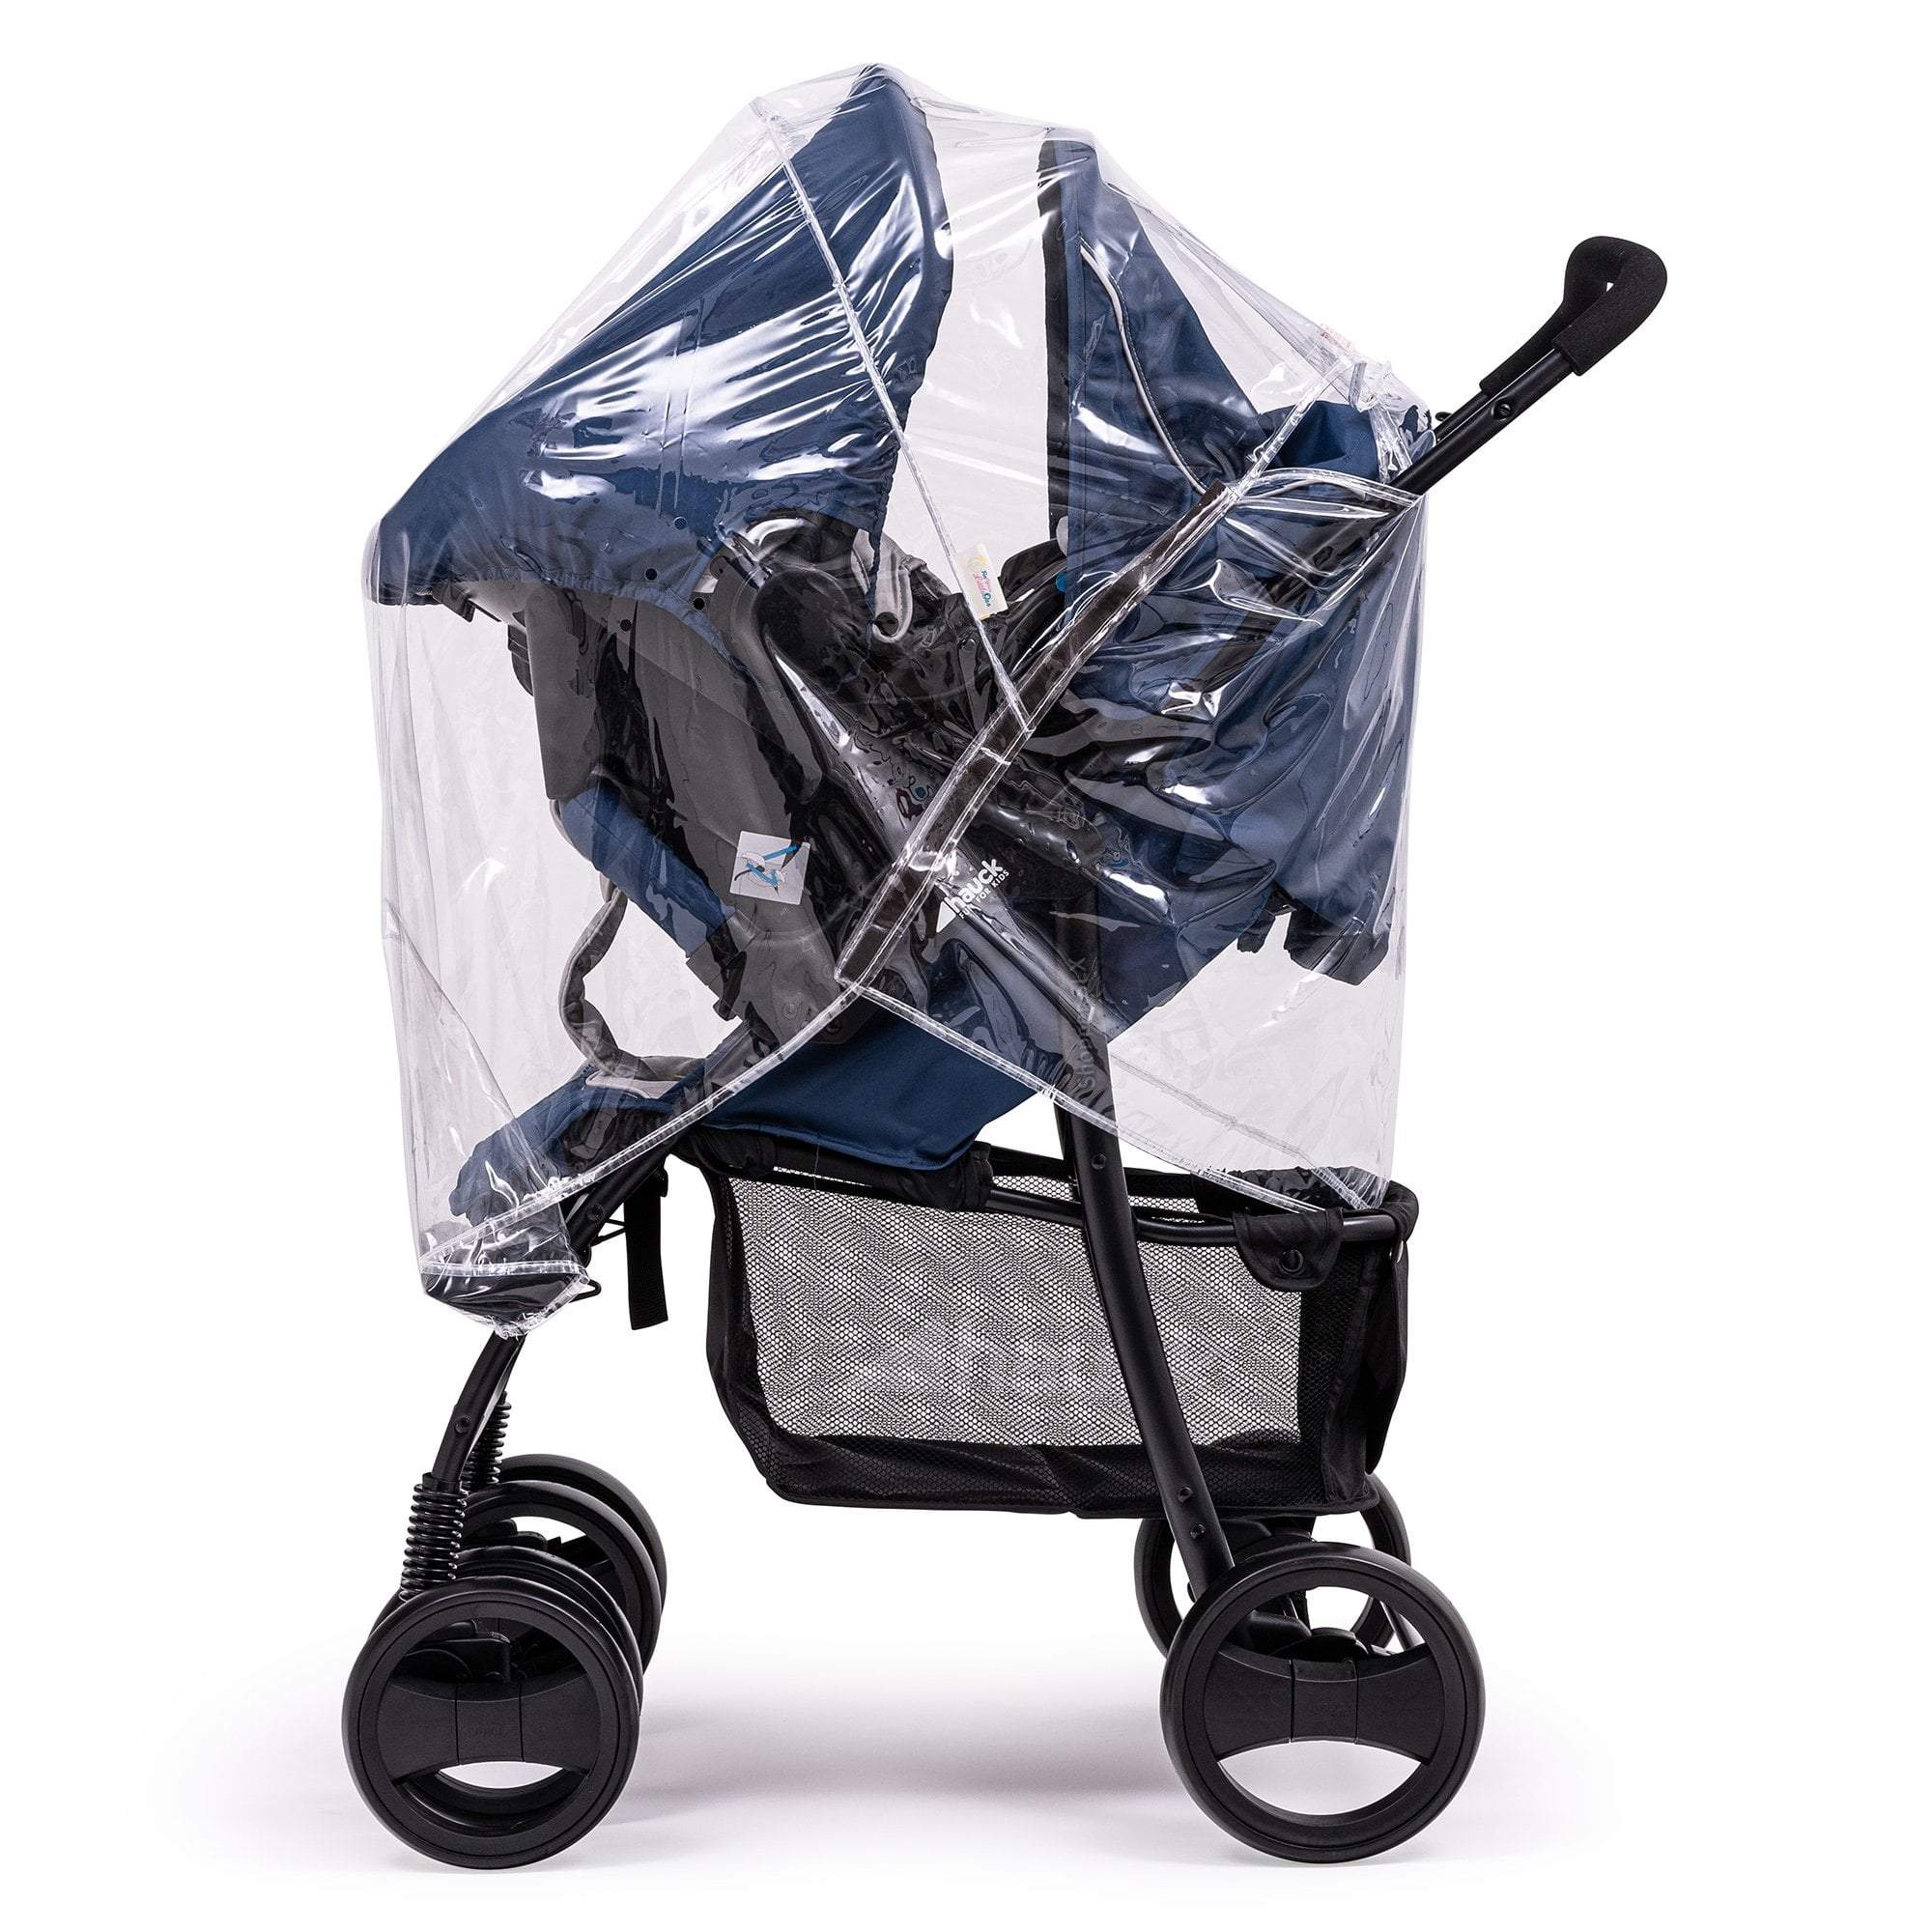 Travel System Raincover Compatible with Firstwheels - Fits All Models - For Your Little One